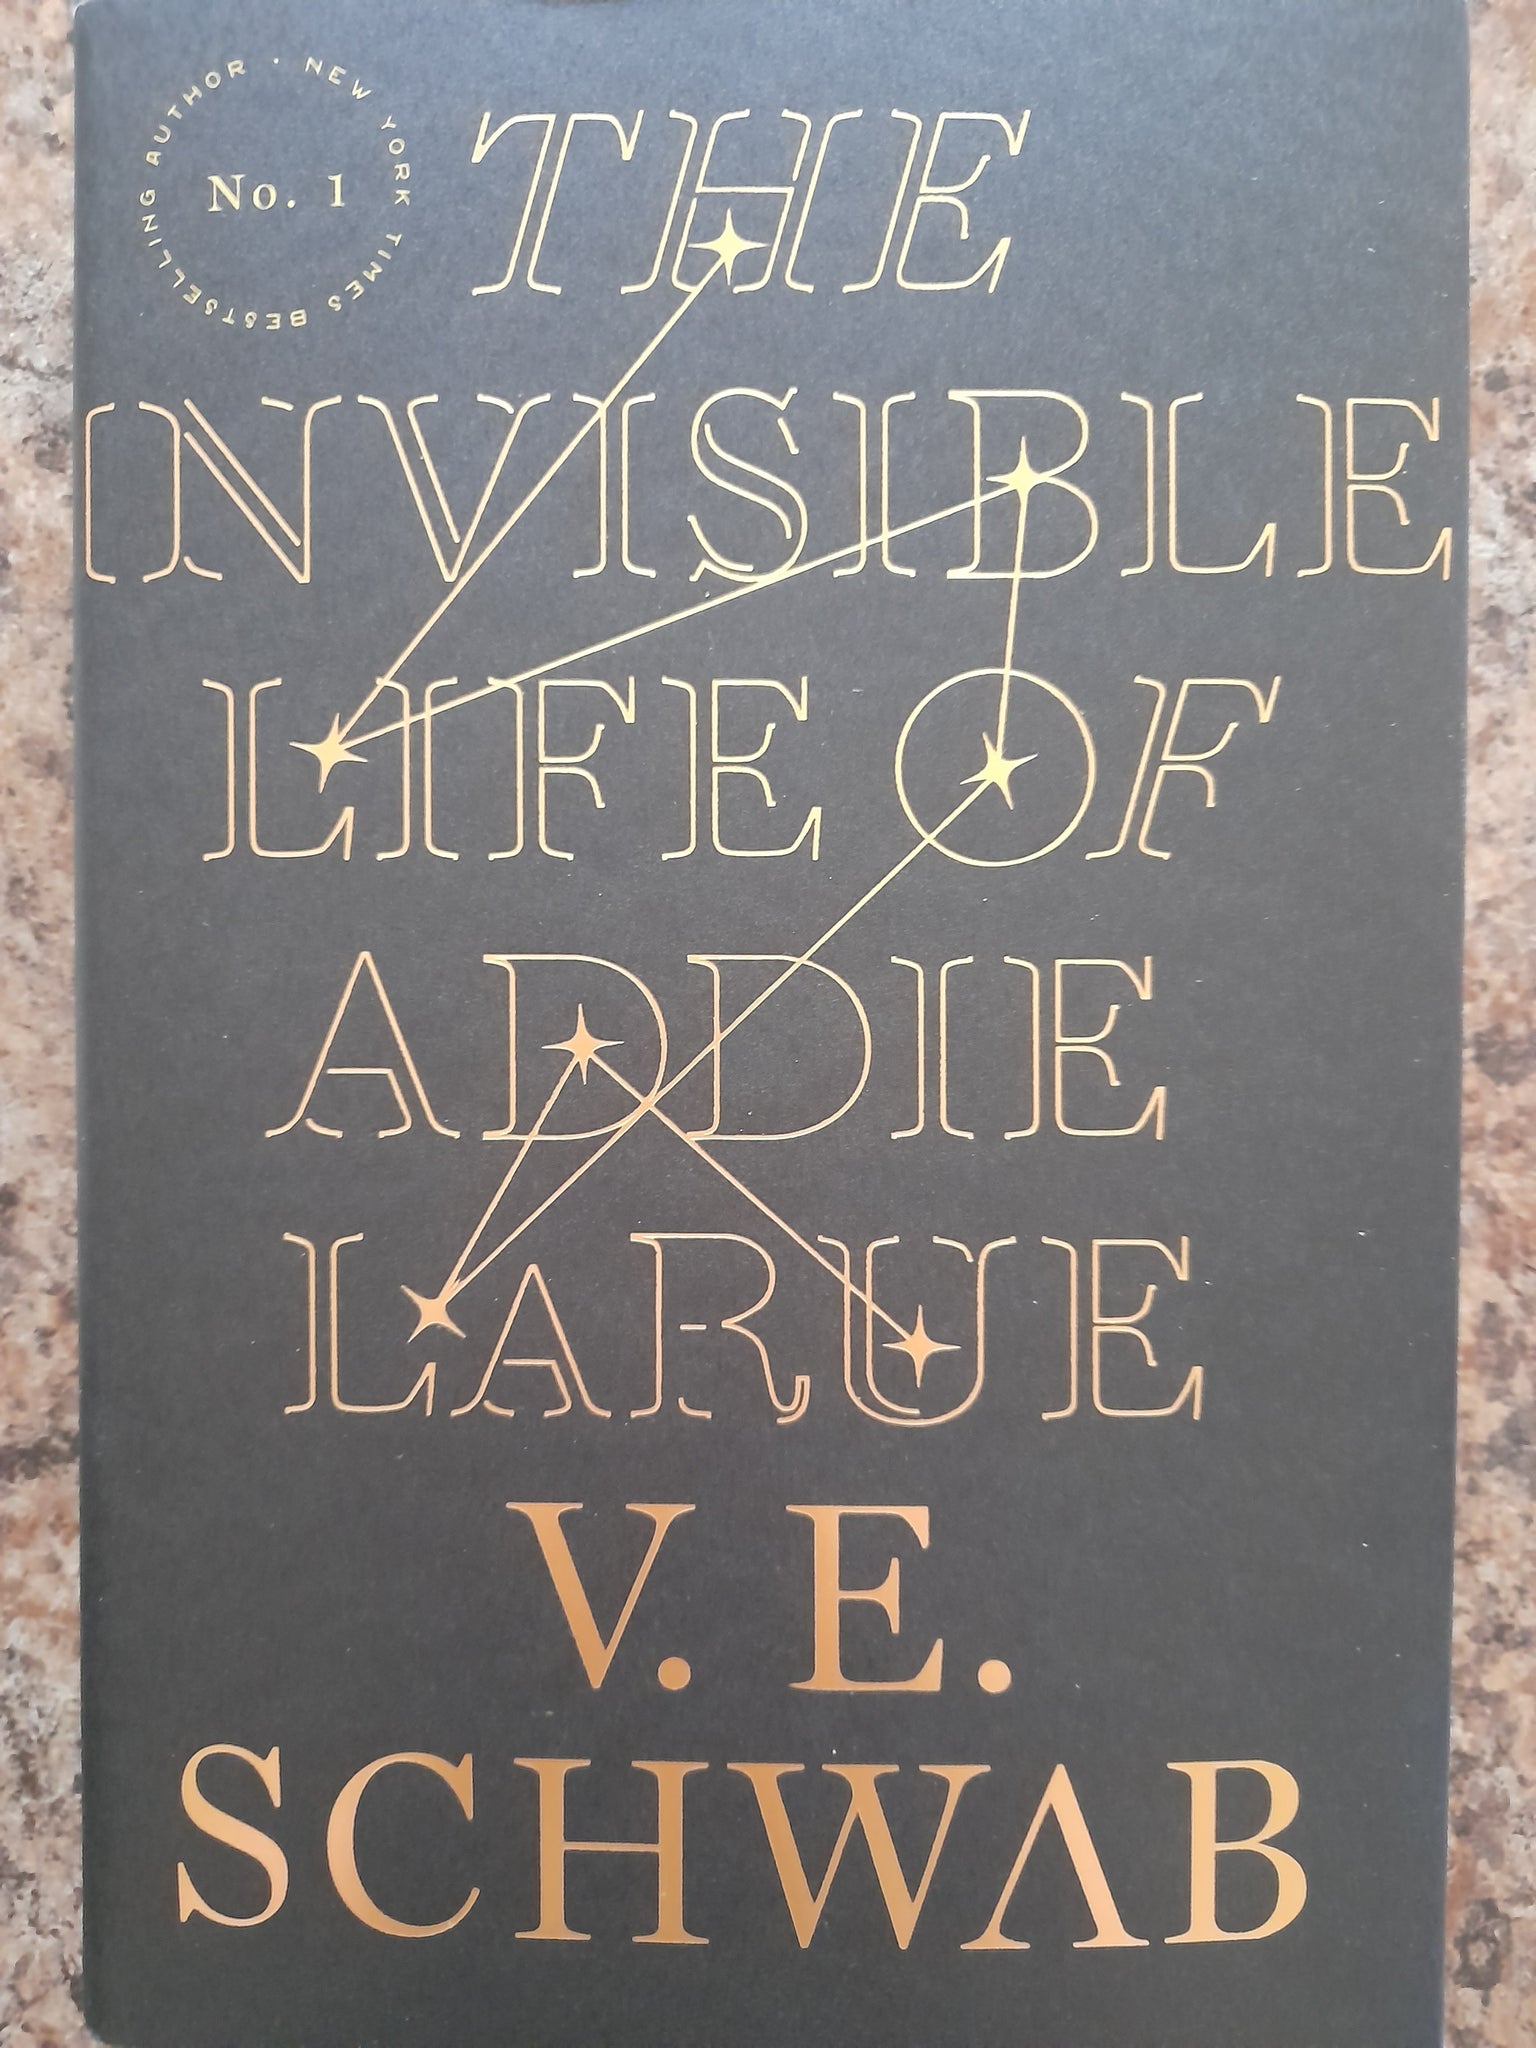 SIGNED The Invisible Life of Addie LaRue by V. E. Schwab